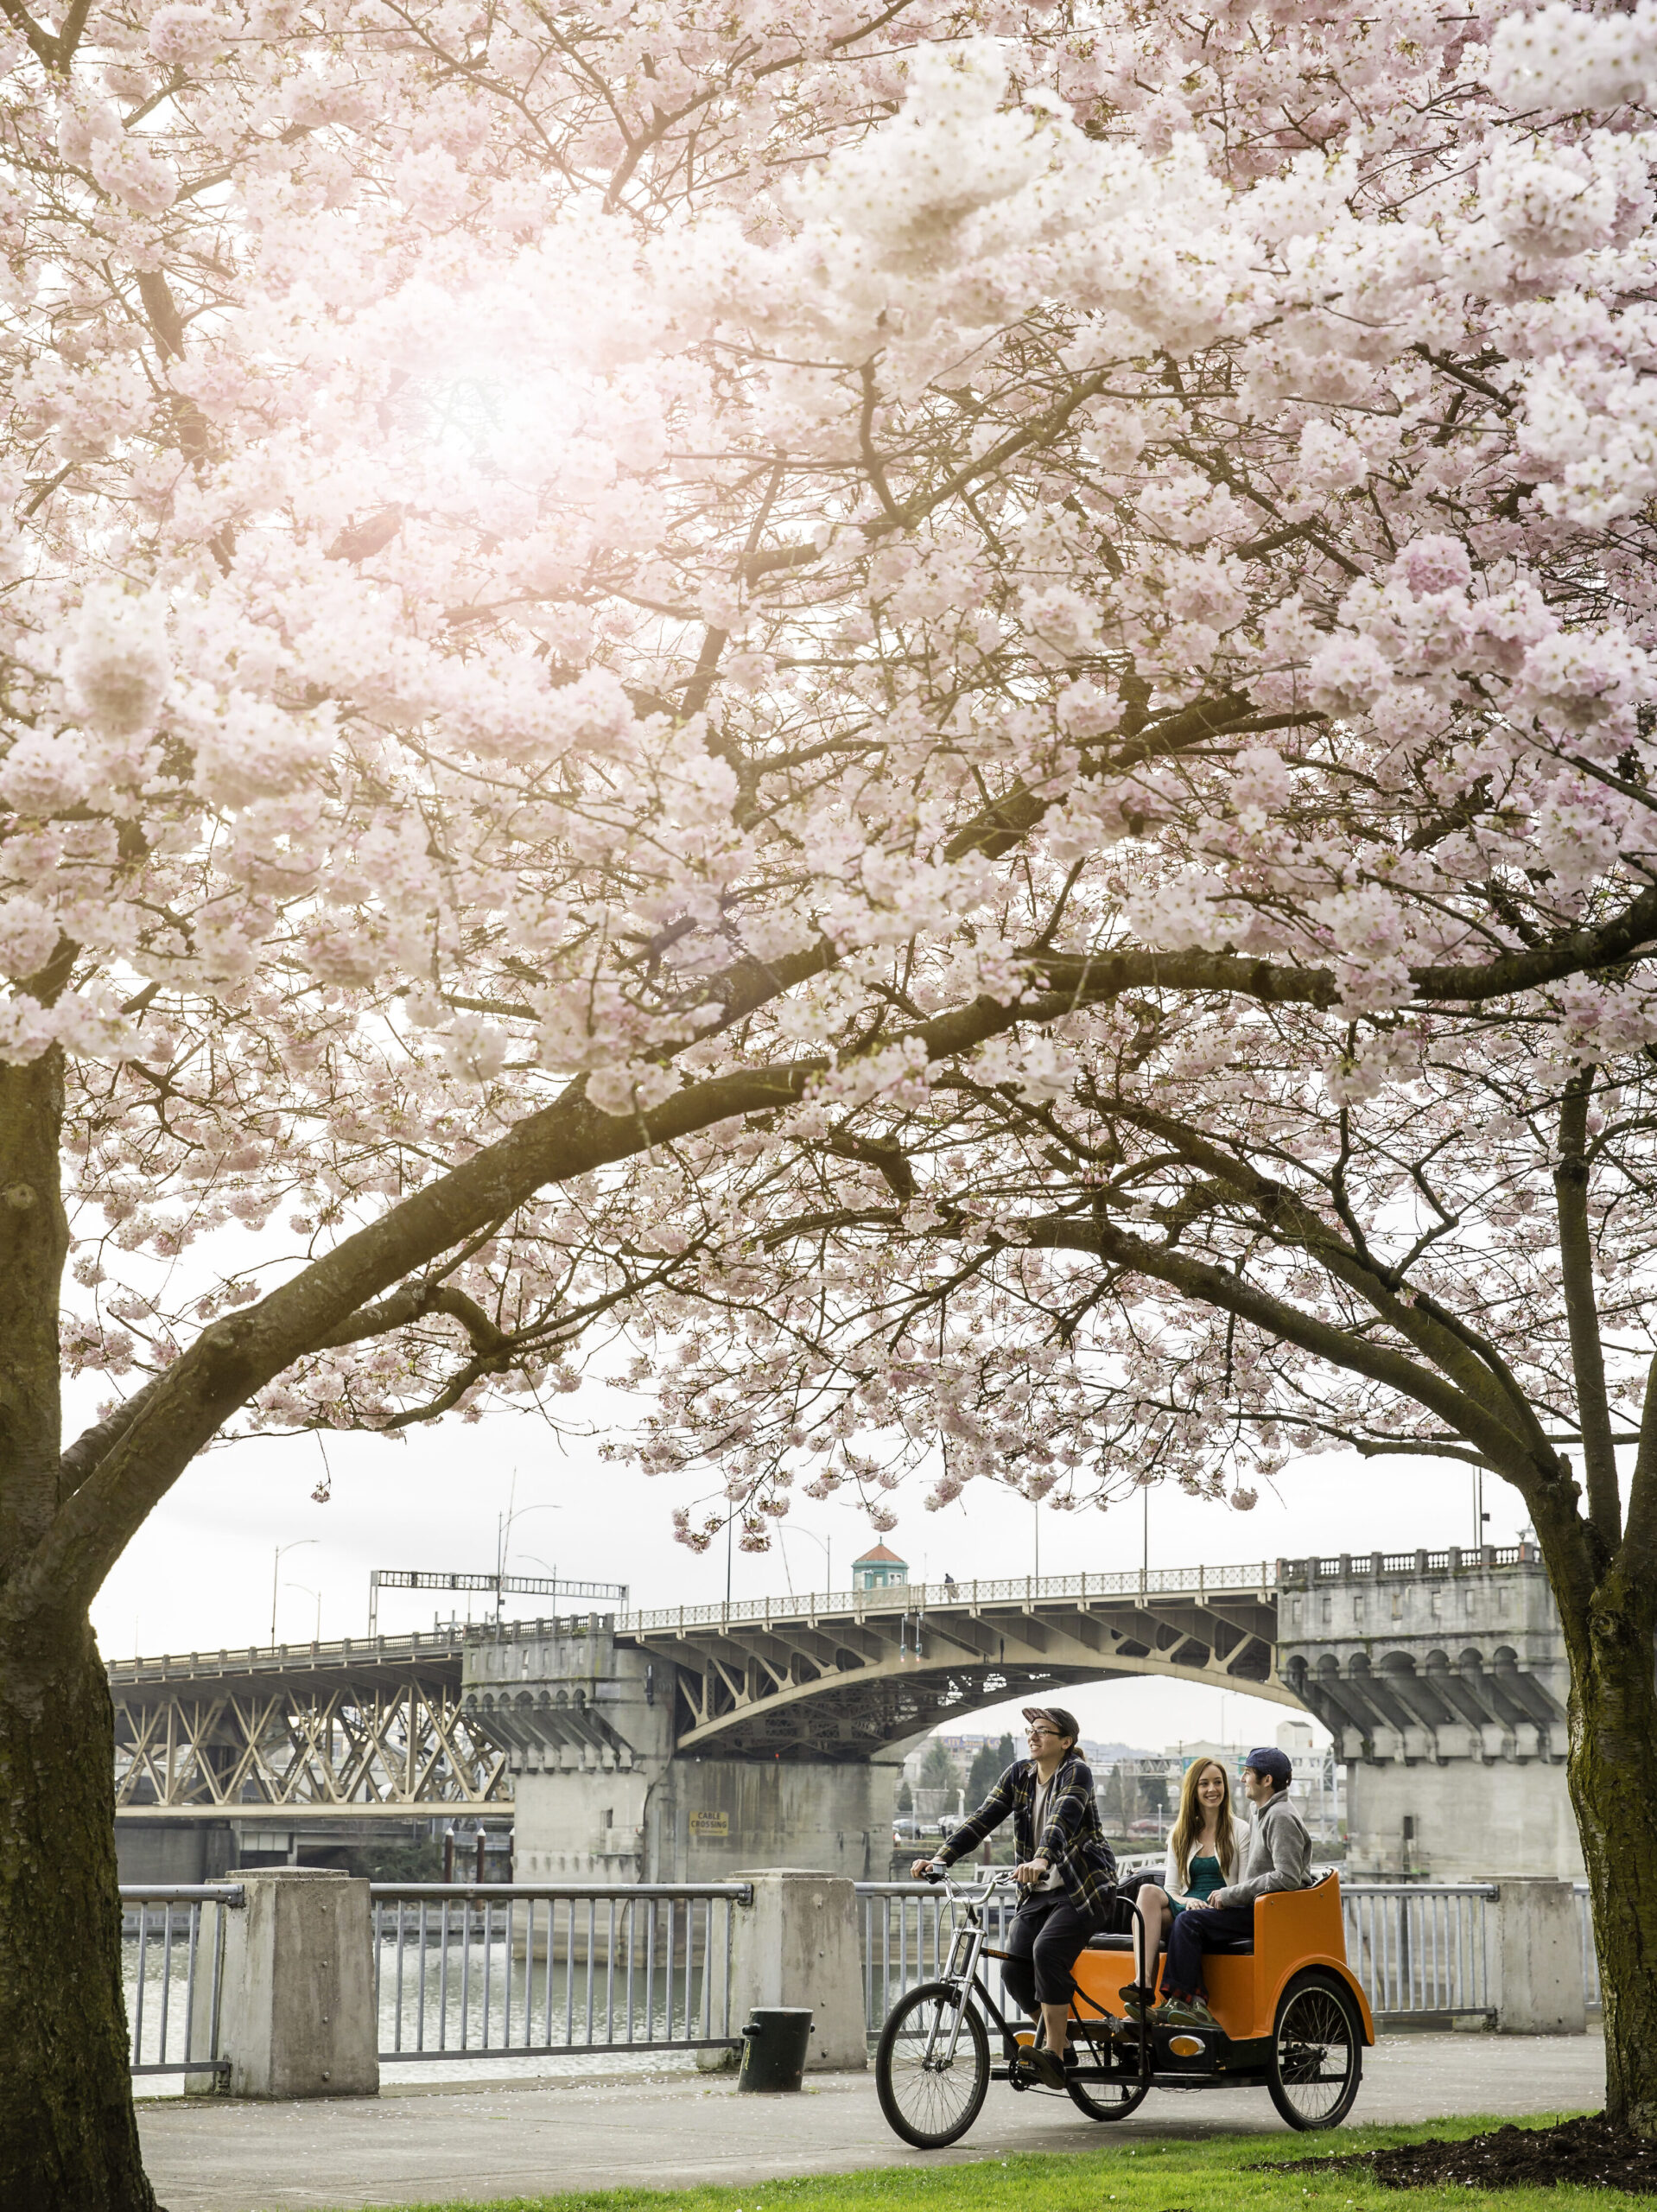 Where to Find Portland Cherry Blossoms